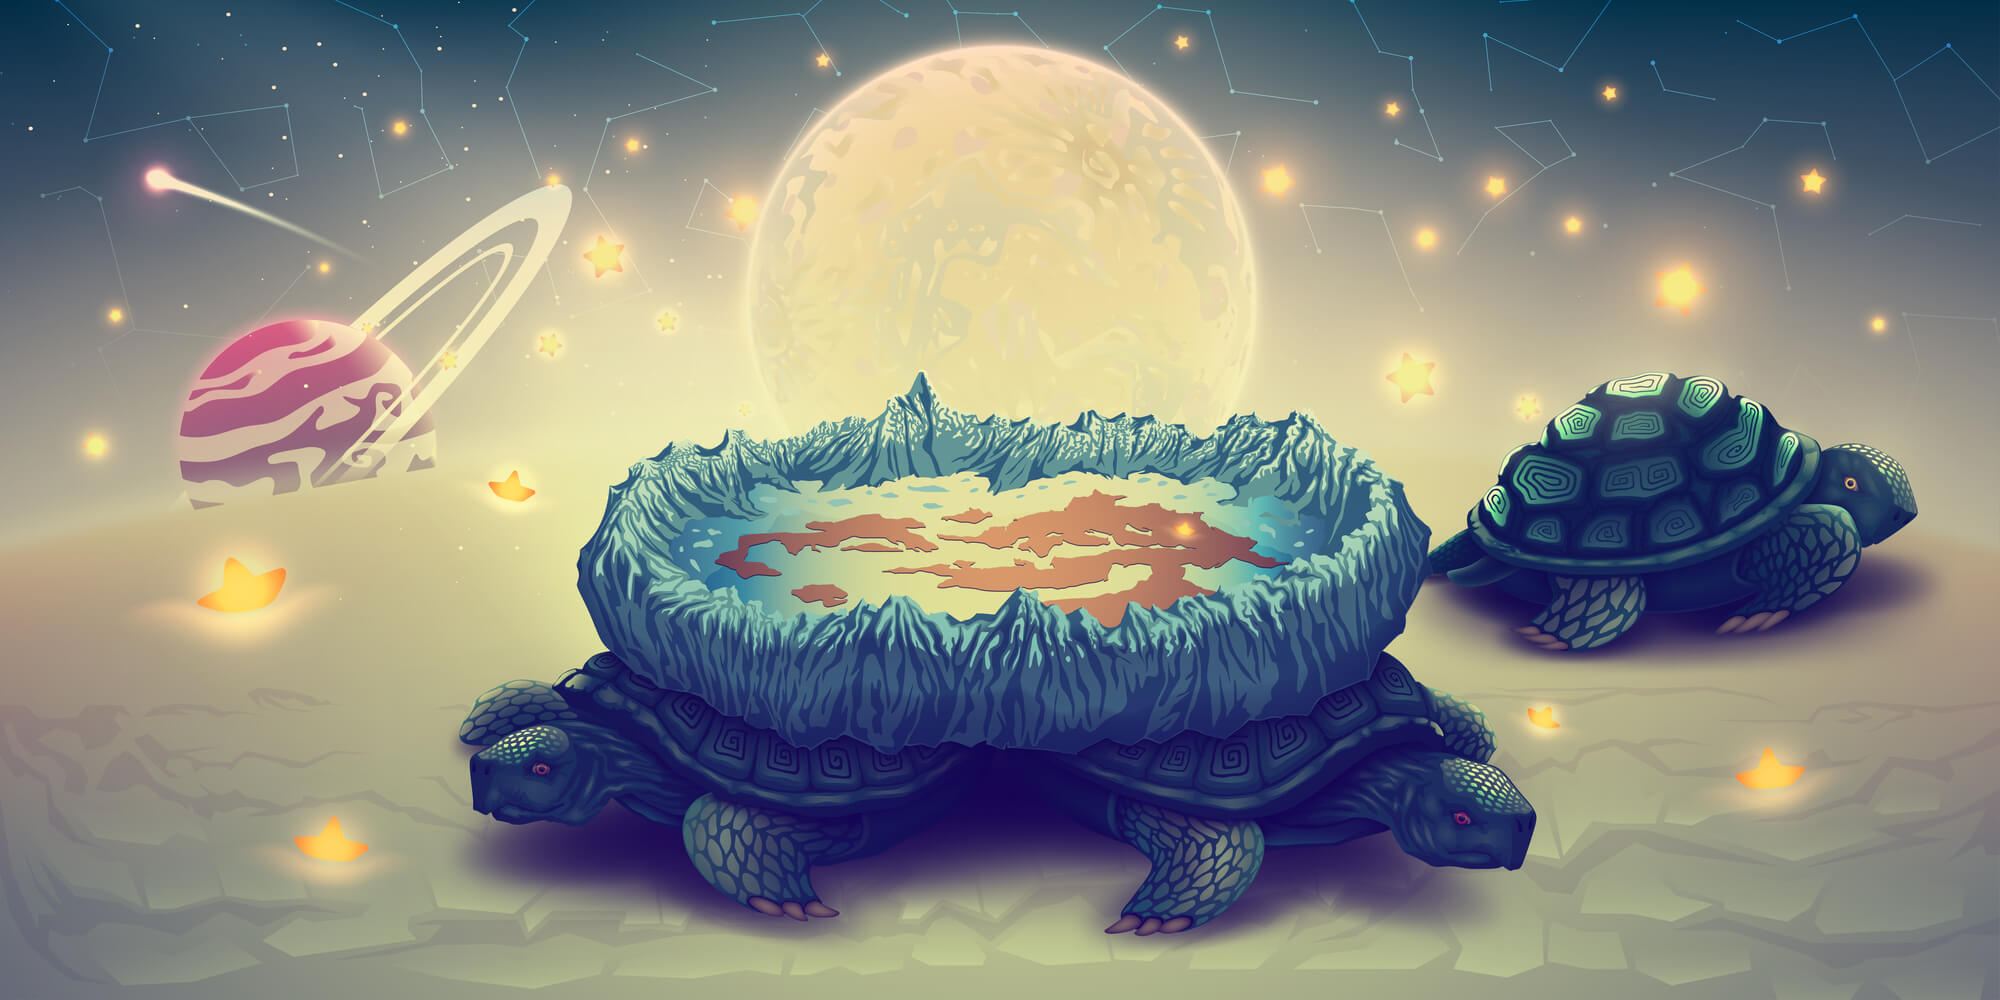 The flat earth carried on a giant turtle. Illustration: depositphotos.com